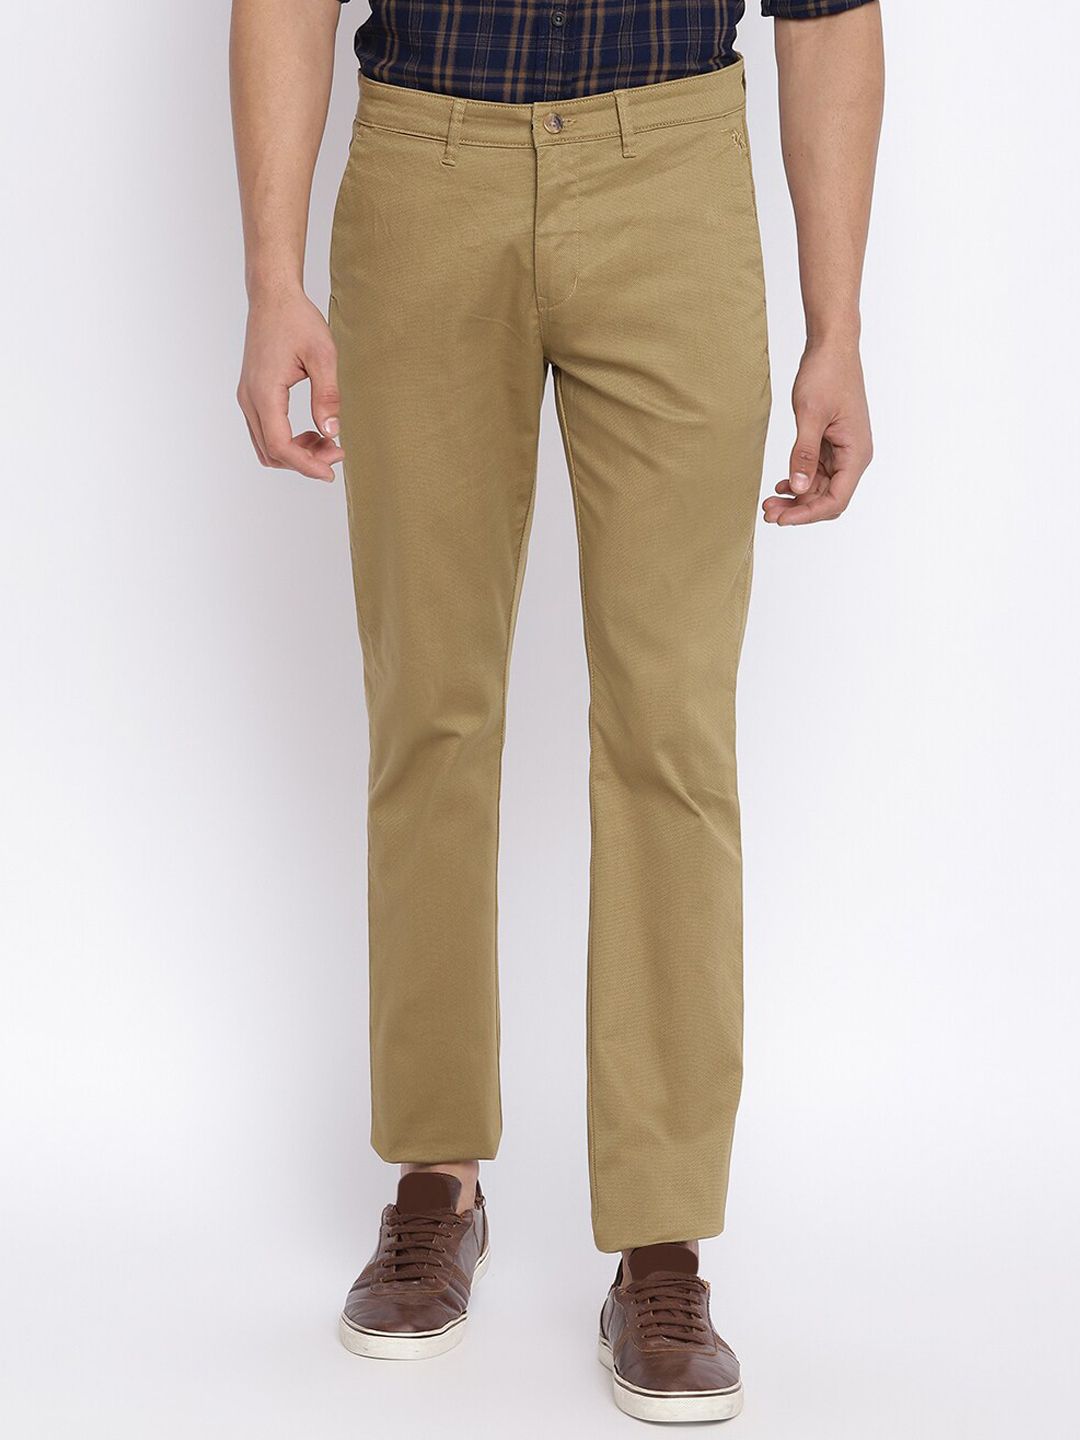 Buy Sand Brown Chinos for Men Online in India at Beyoung